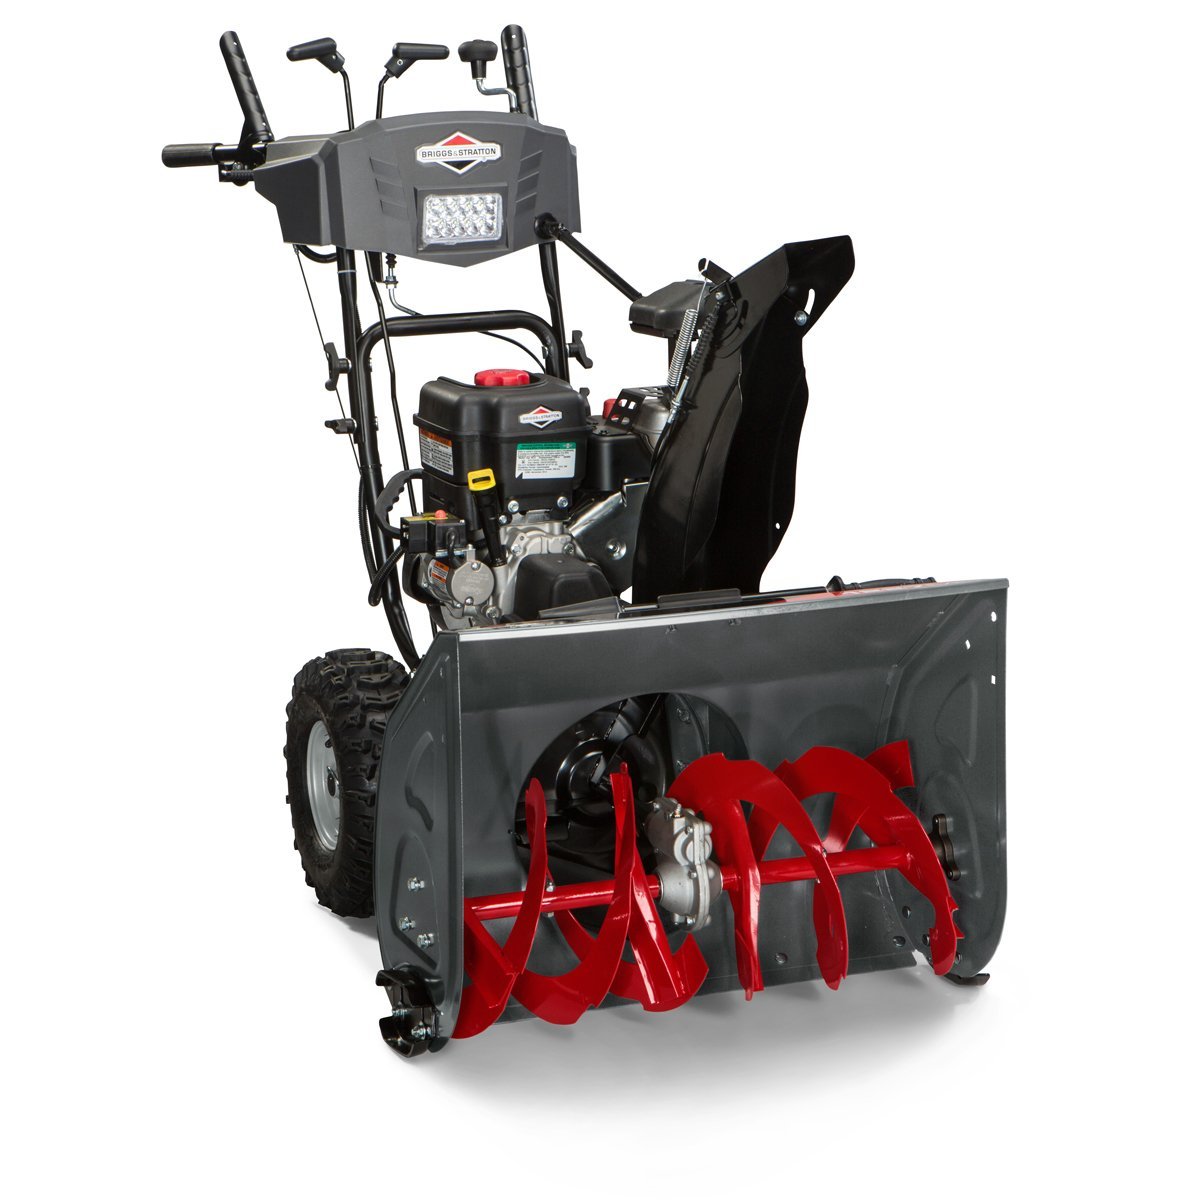 Briggs and Stratton Power Products Briggs and Stratton 1696619 Dual-Stage Snow Thrower with 250cc Engine and Electric Start